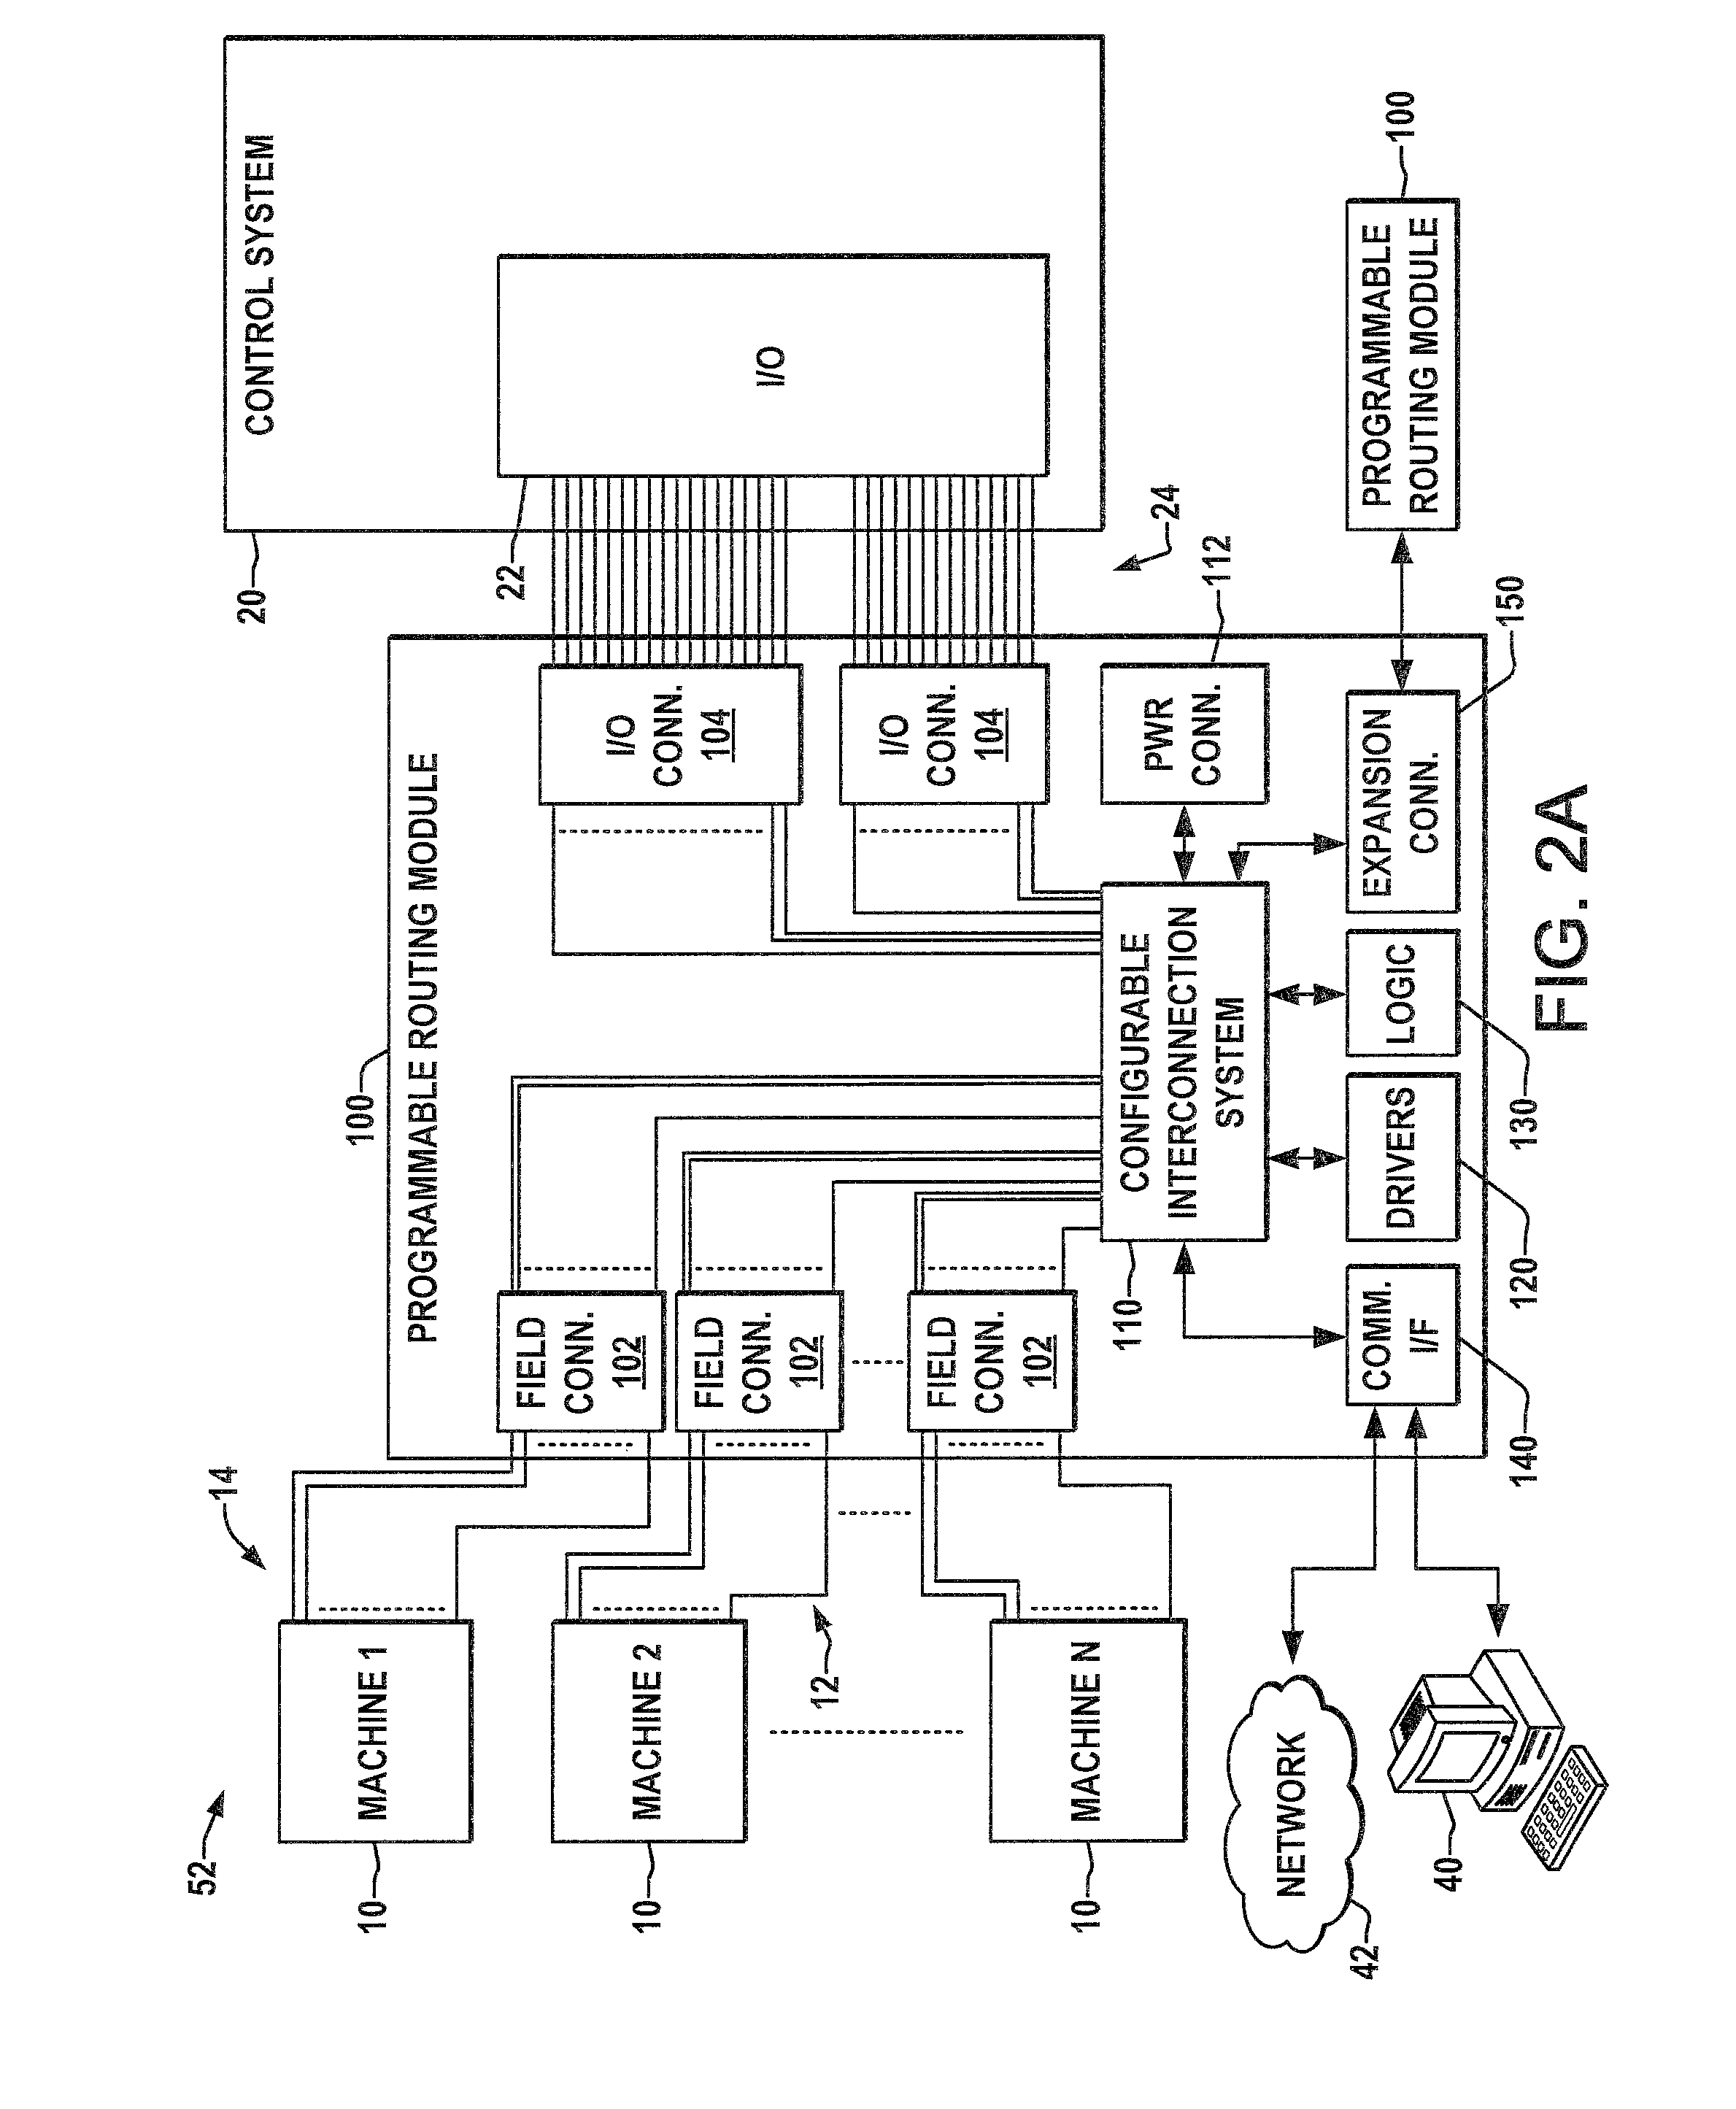 Programmable routing module